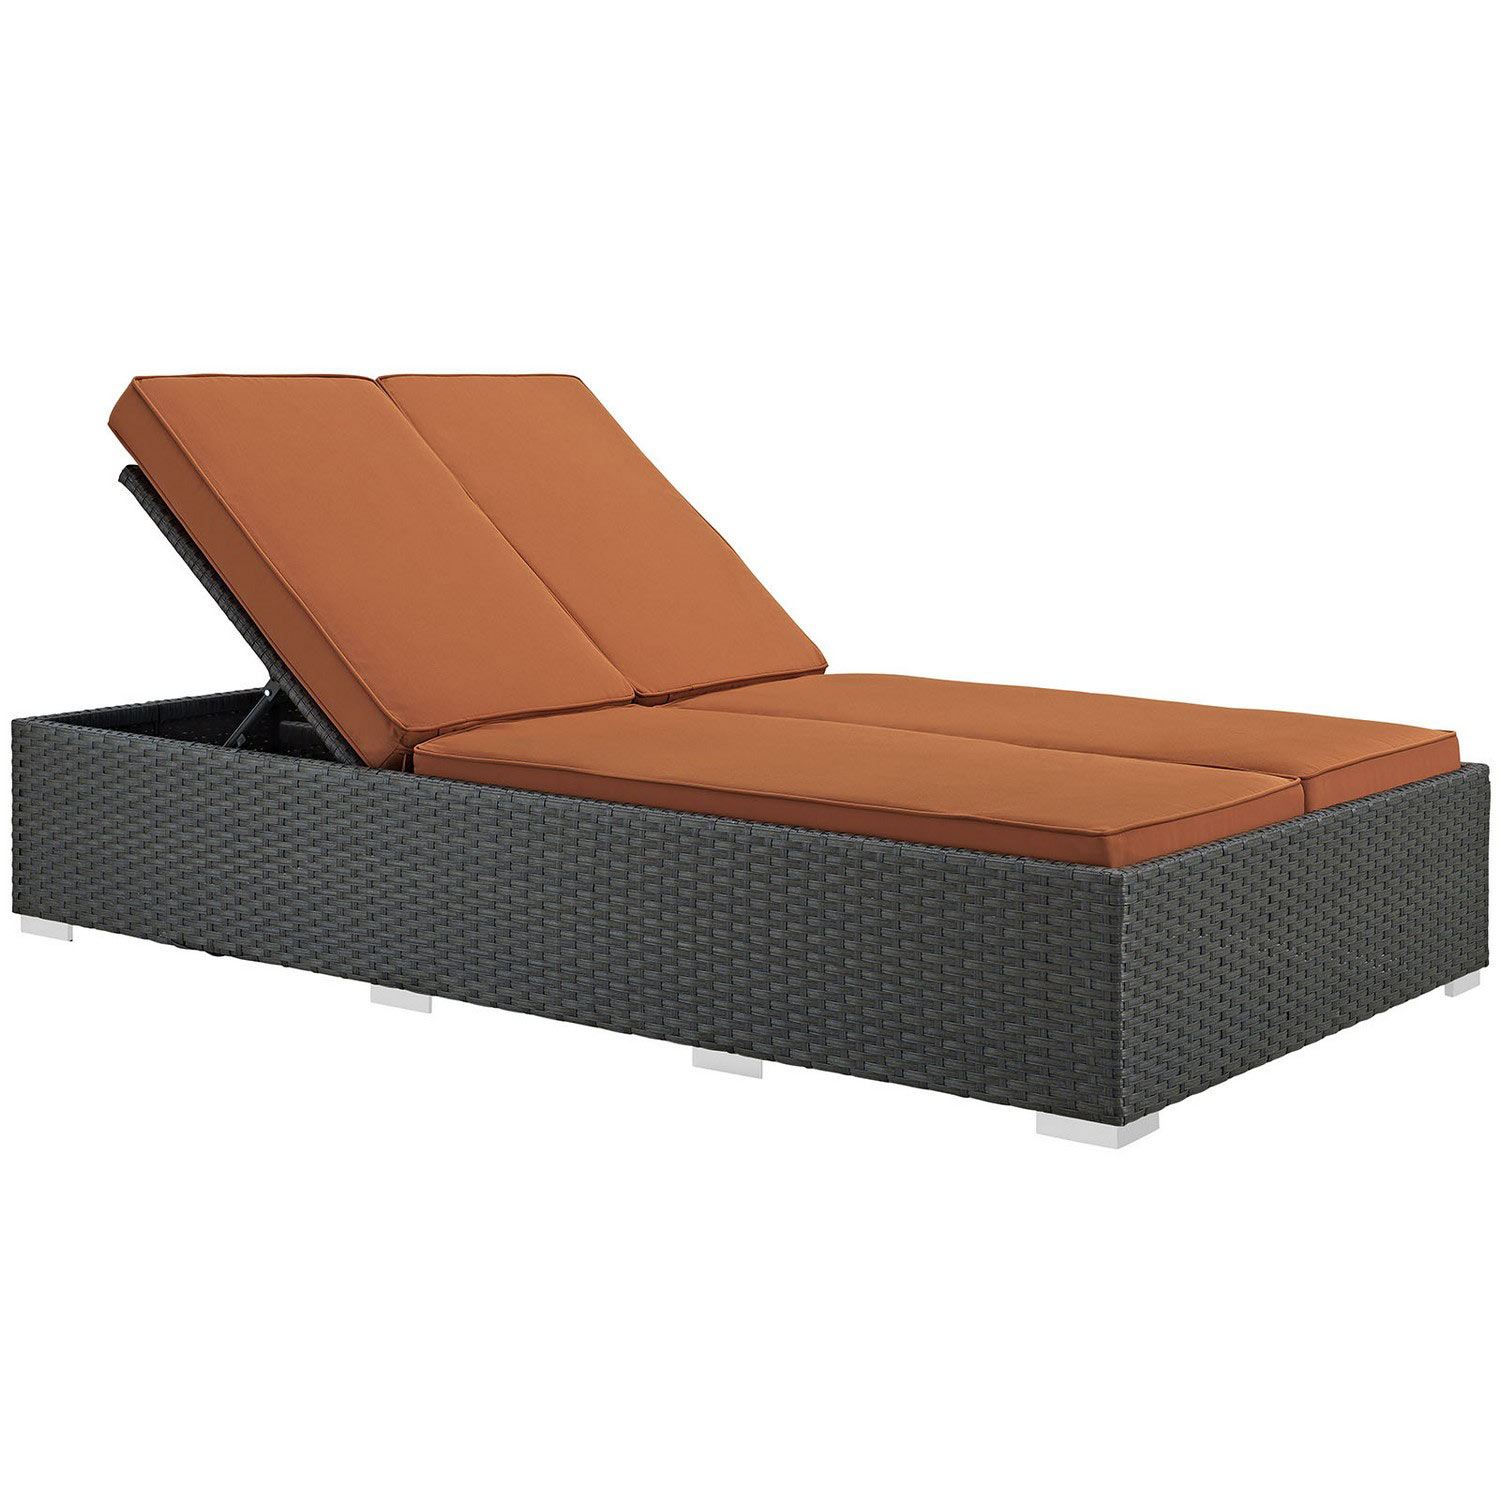 Modway Sojourn Outdoor Patio Sunbrella Double Chaise - Chocolate Tuscan